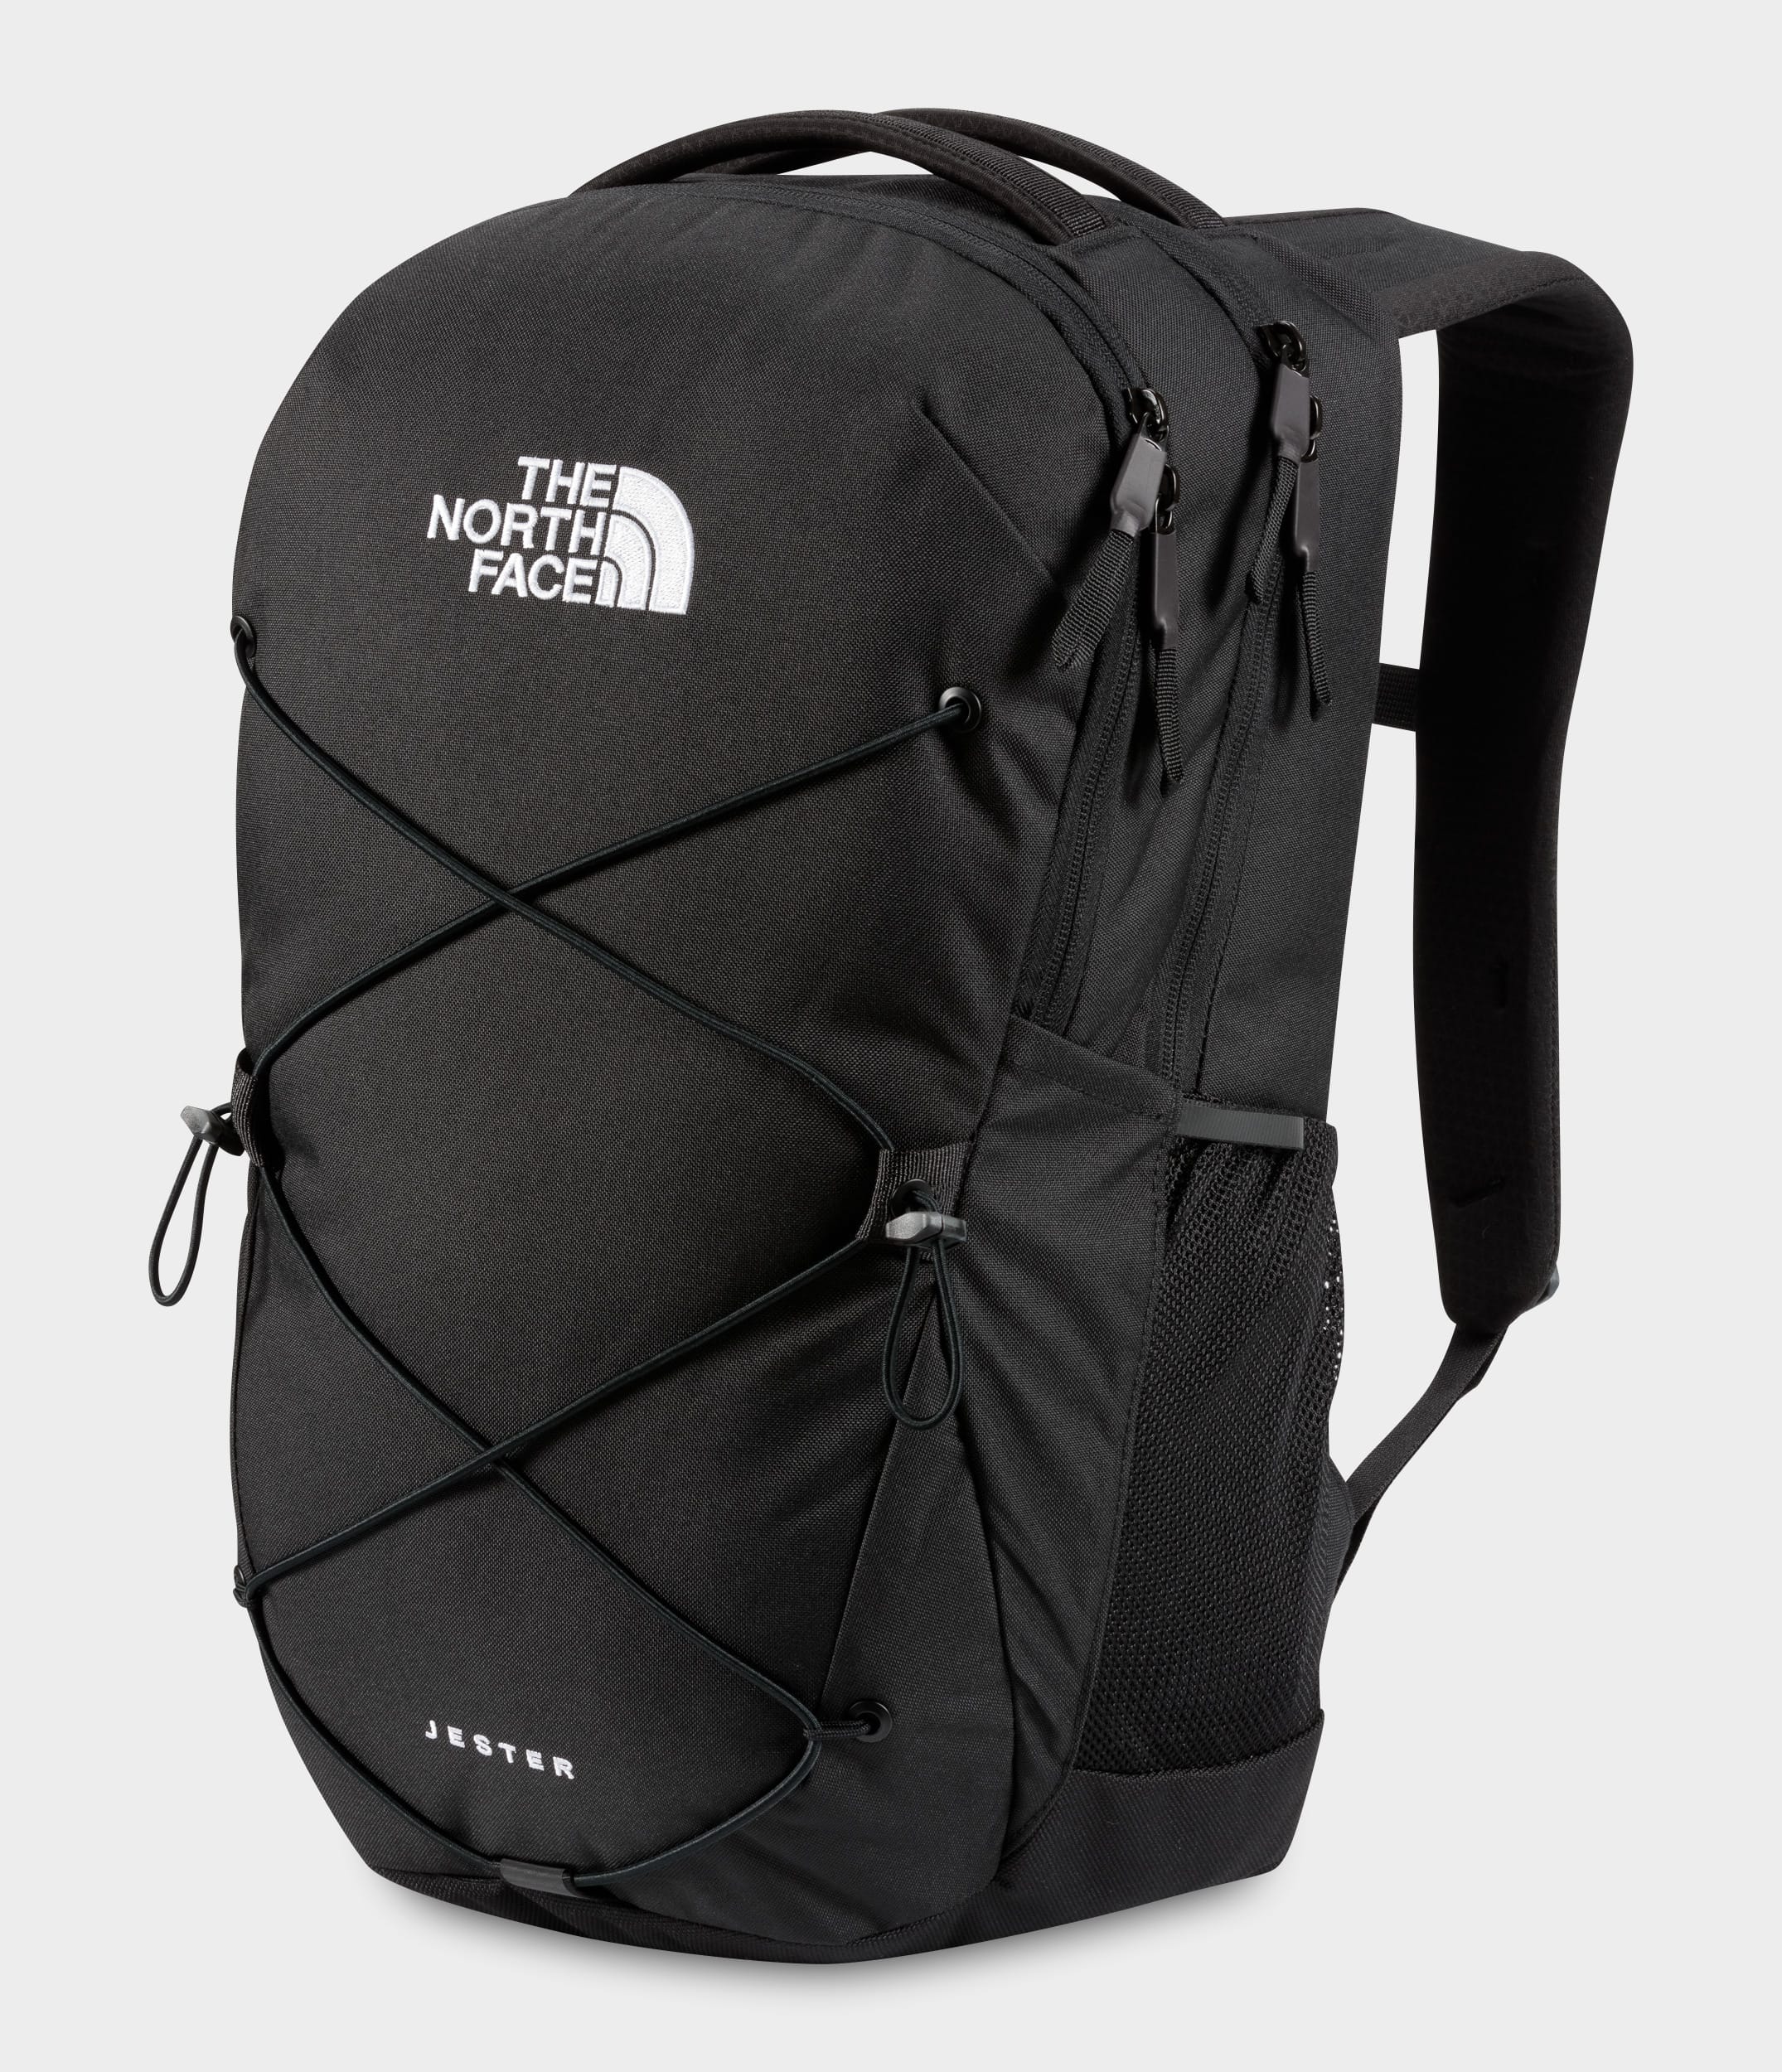 The North Face Jester Backpack Black Irv's LuggageThe North Face Jester Black | Irv's LuggageThe North Face Jester Black | Irv's LuggageThe North Face Jester Backpack Black | Irv's Luggage